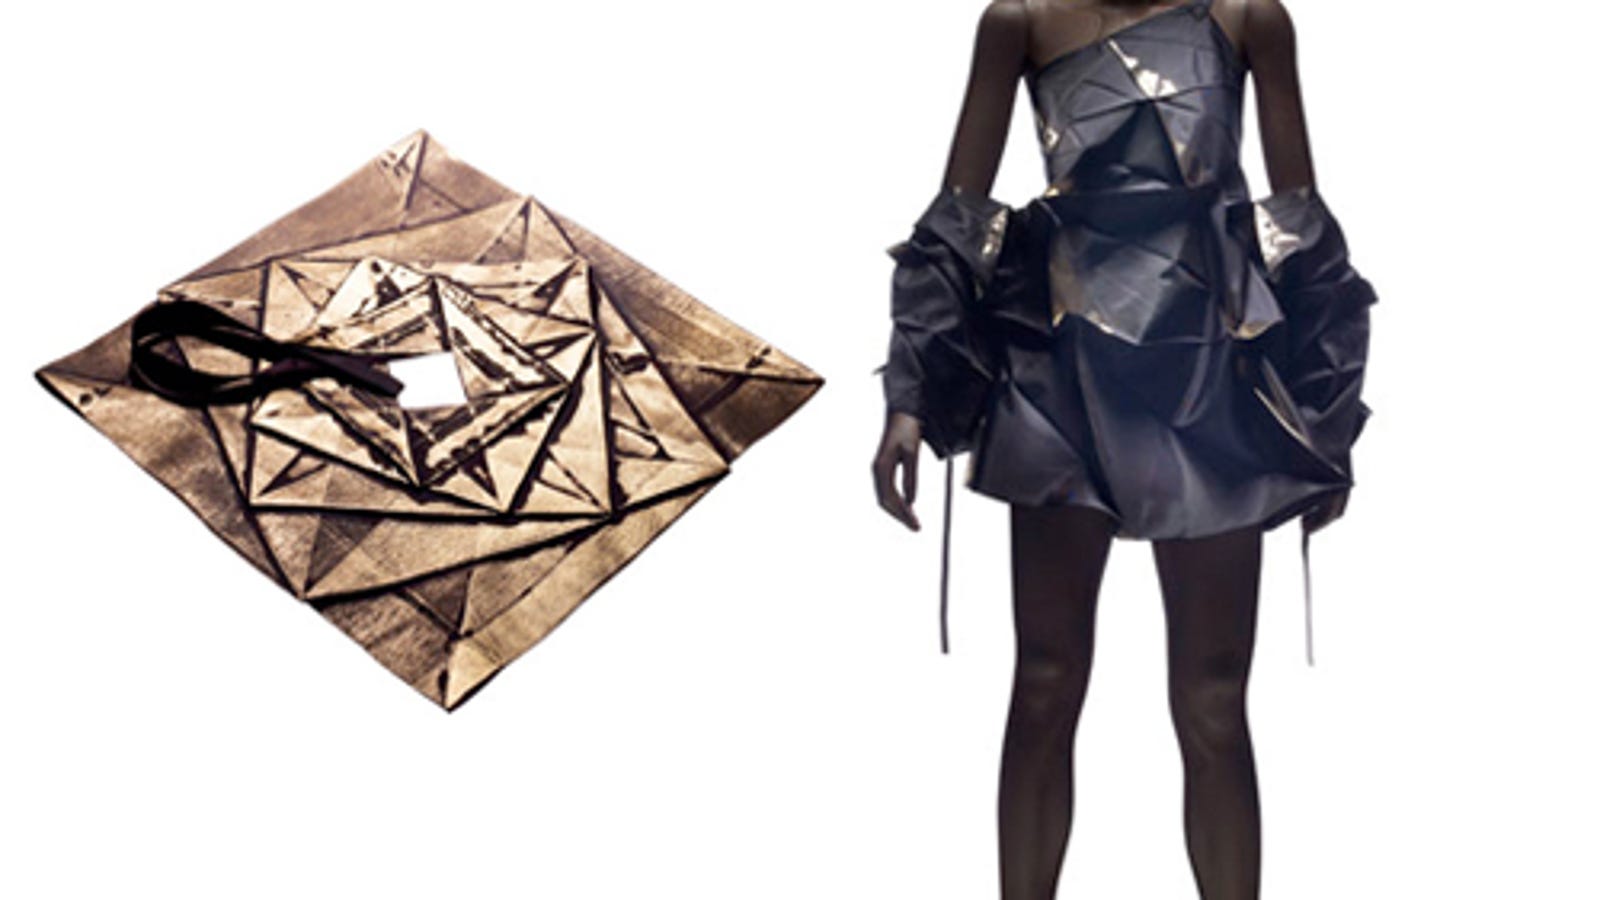 Geometric Clothes Fold Into Futuristic Outfits With Plenty of Creases